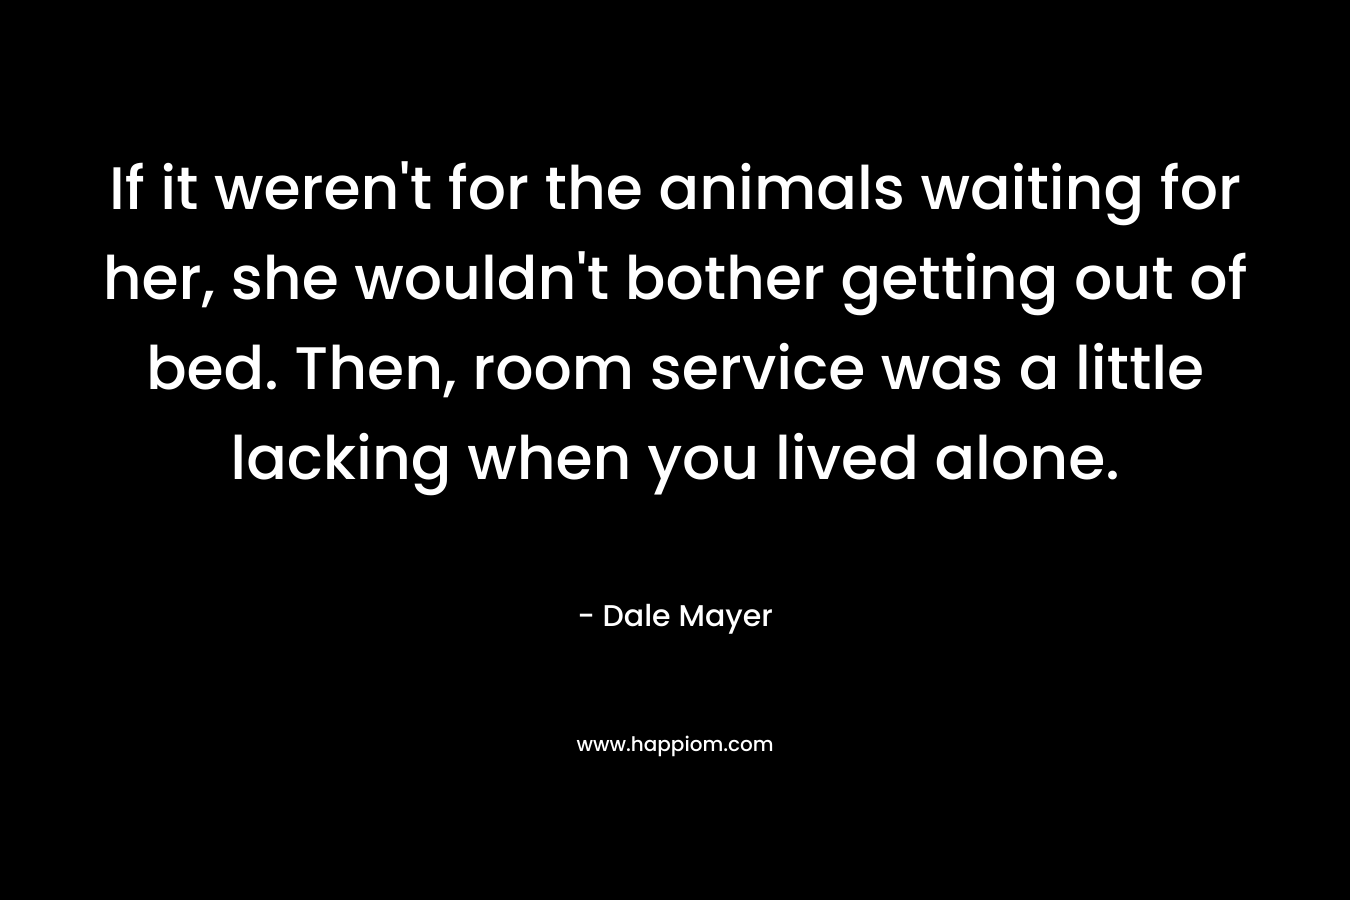 If it weren’t for the animals waiting for her, she wouldn’t bother getting out of bed. Then, room service was a little lacking when you lived alone. – Dale Mayer